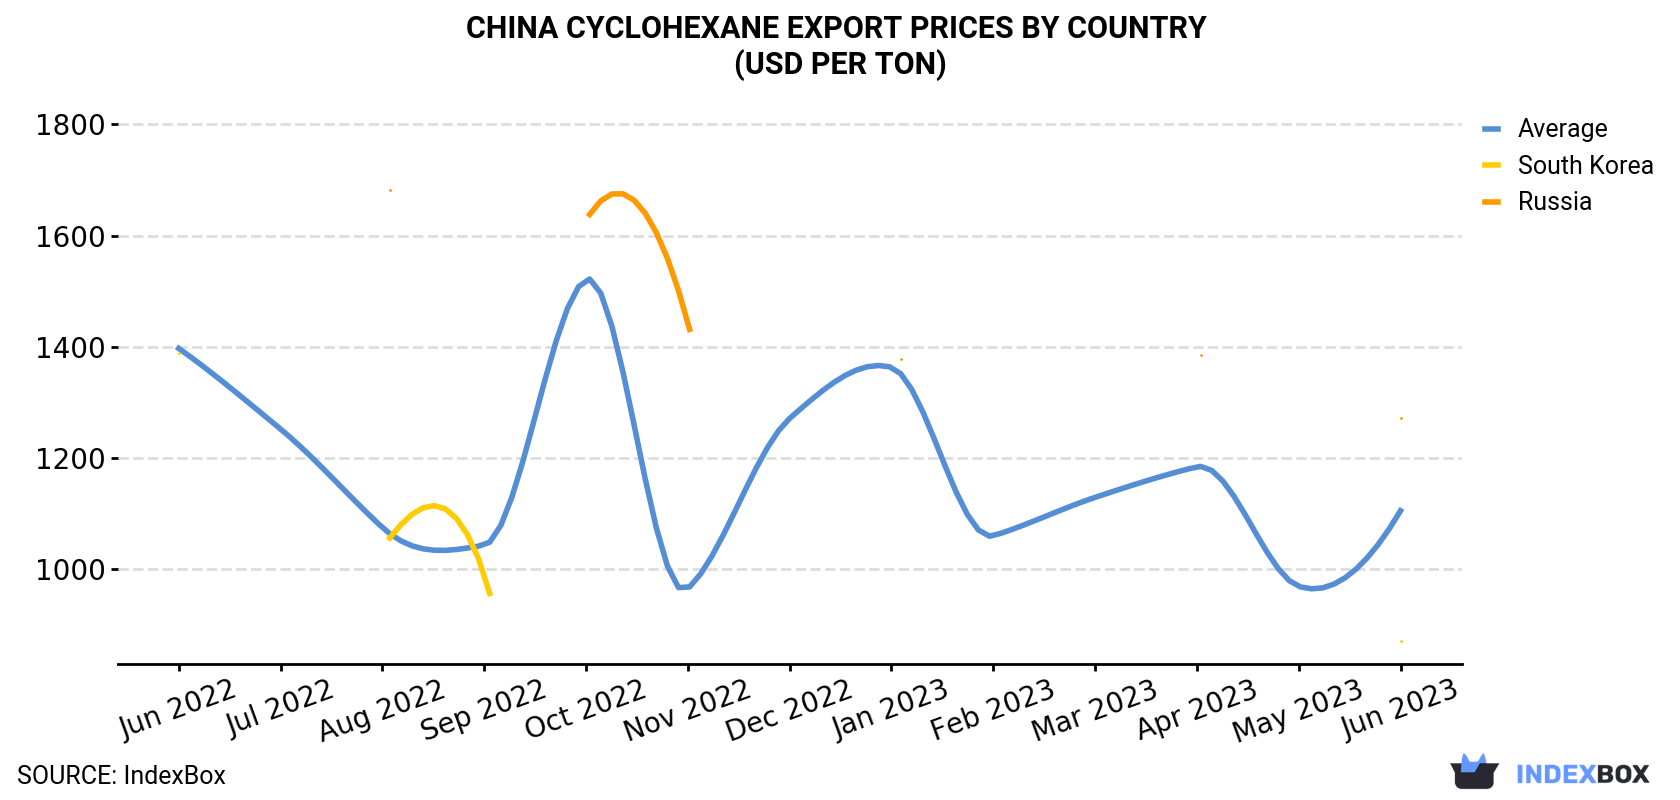 China Cyclohexane Export Prices By Country (USD Per Ton)